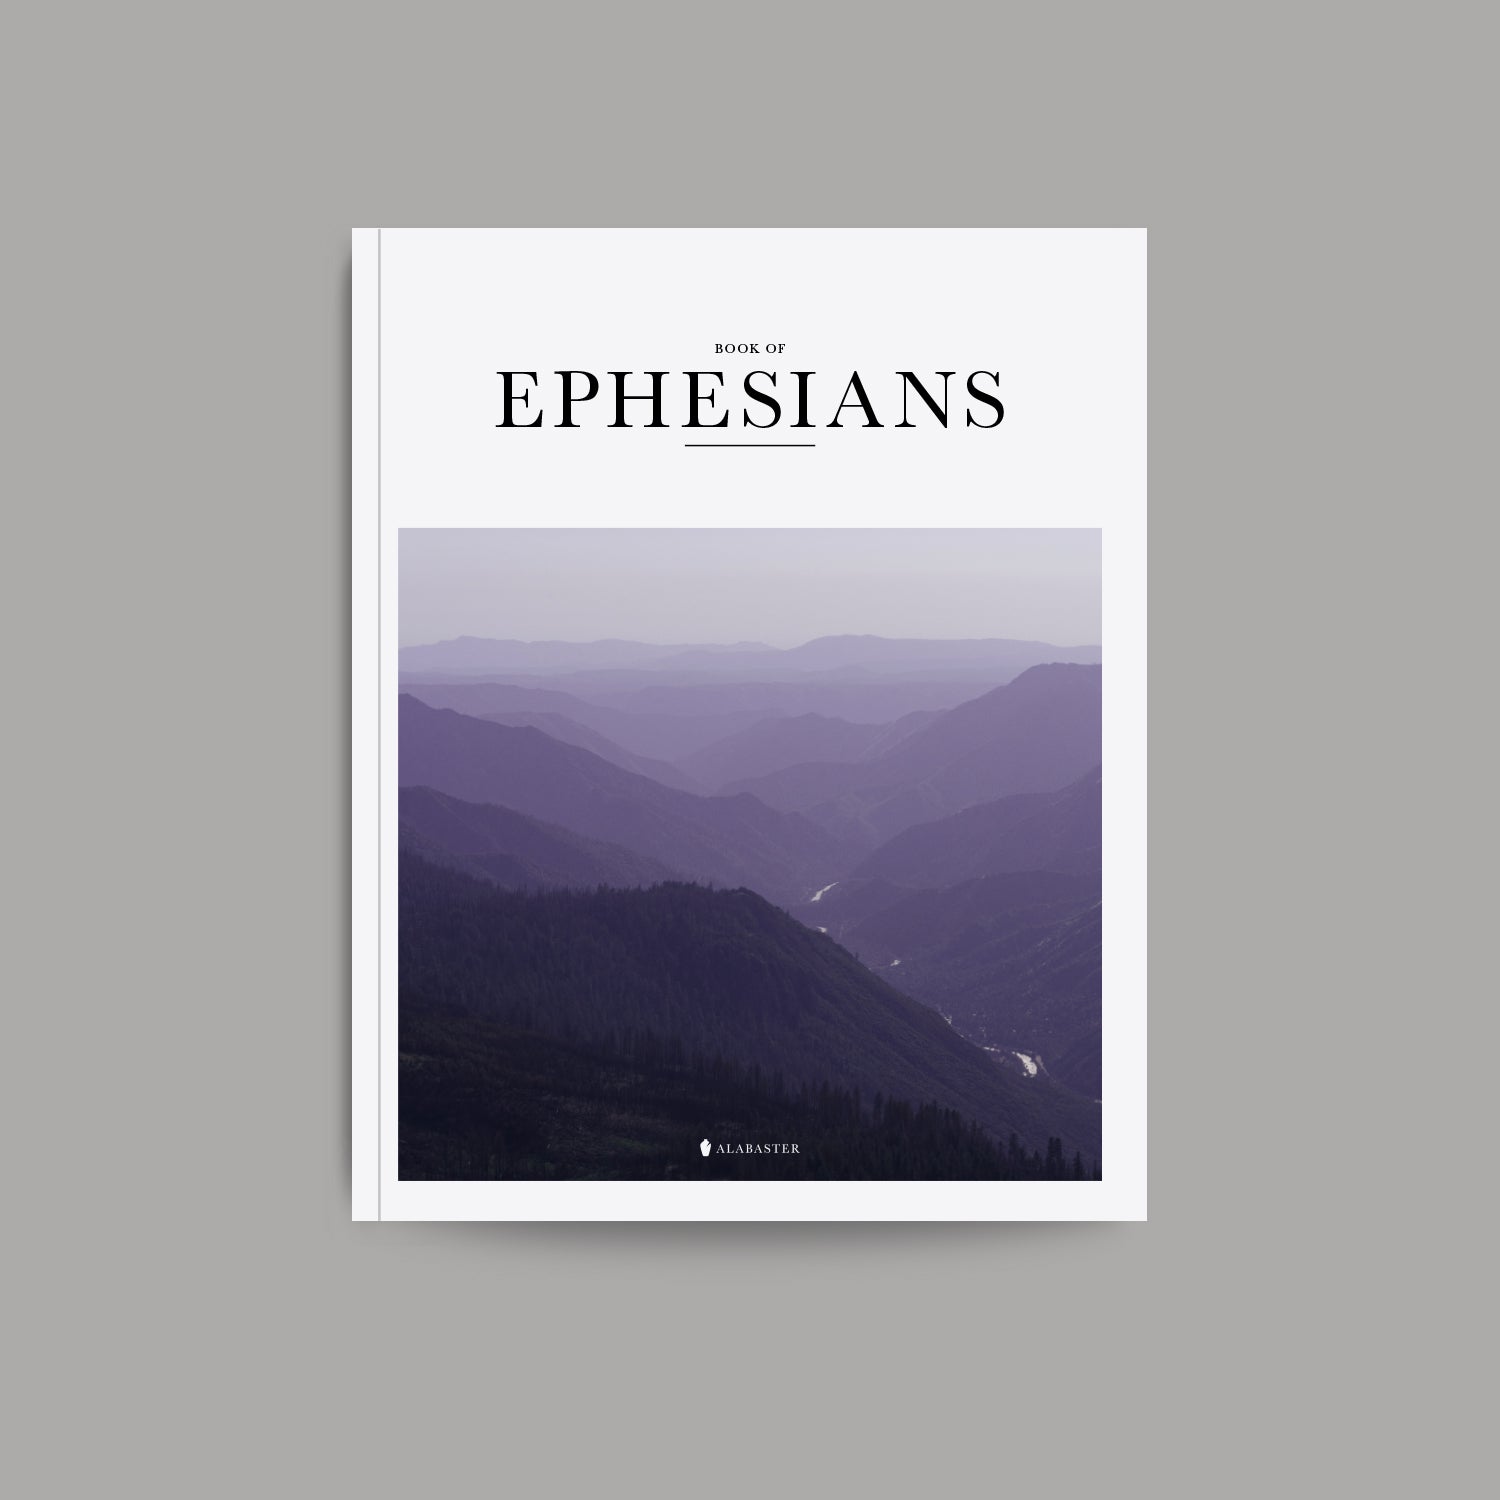 The Book of Ephesians softcover